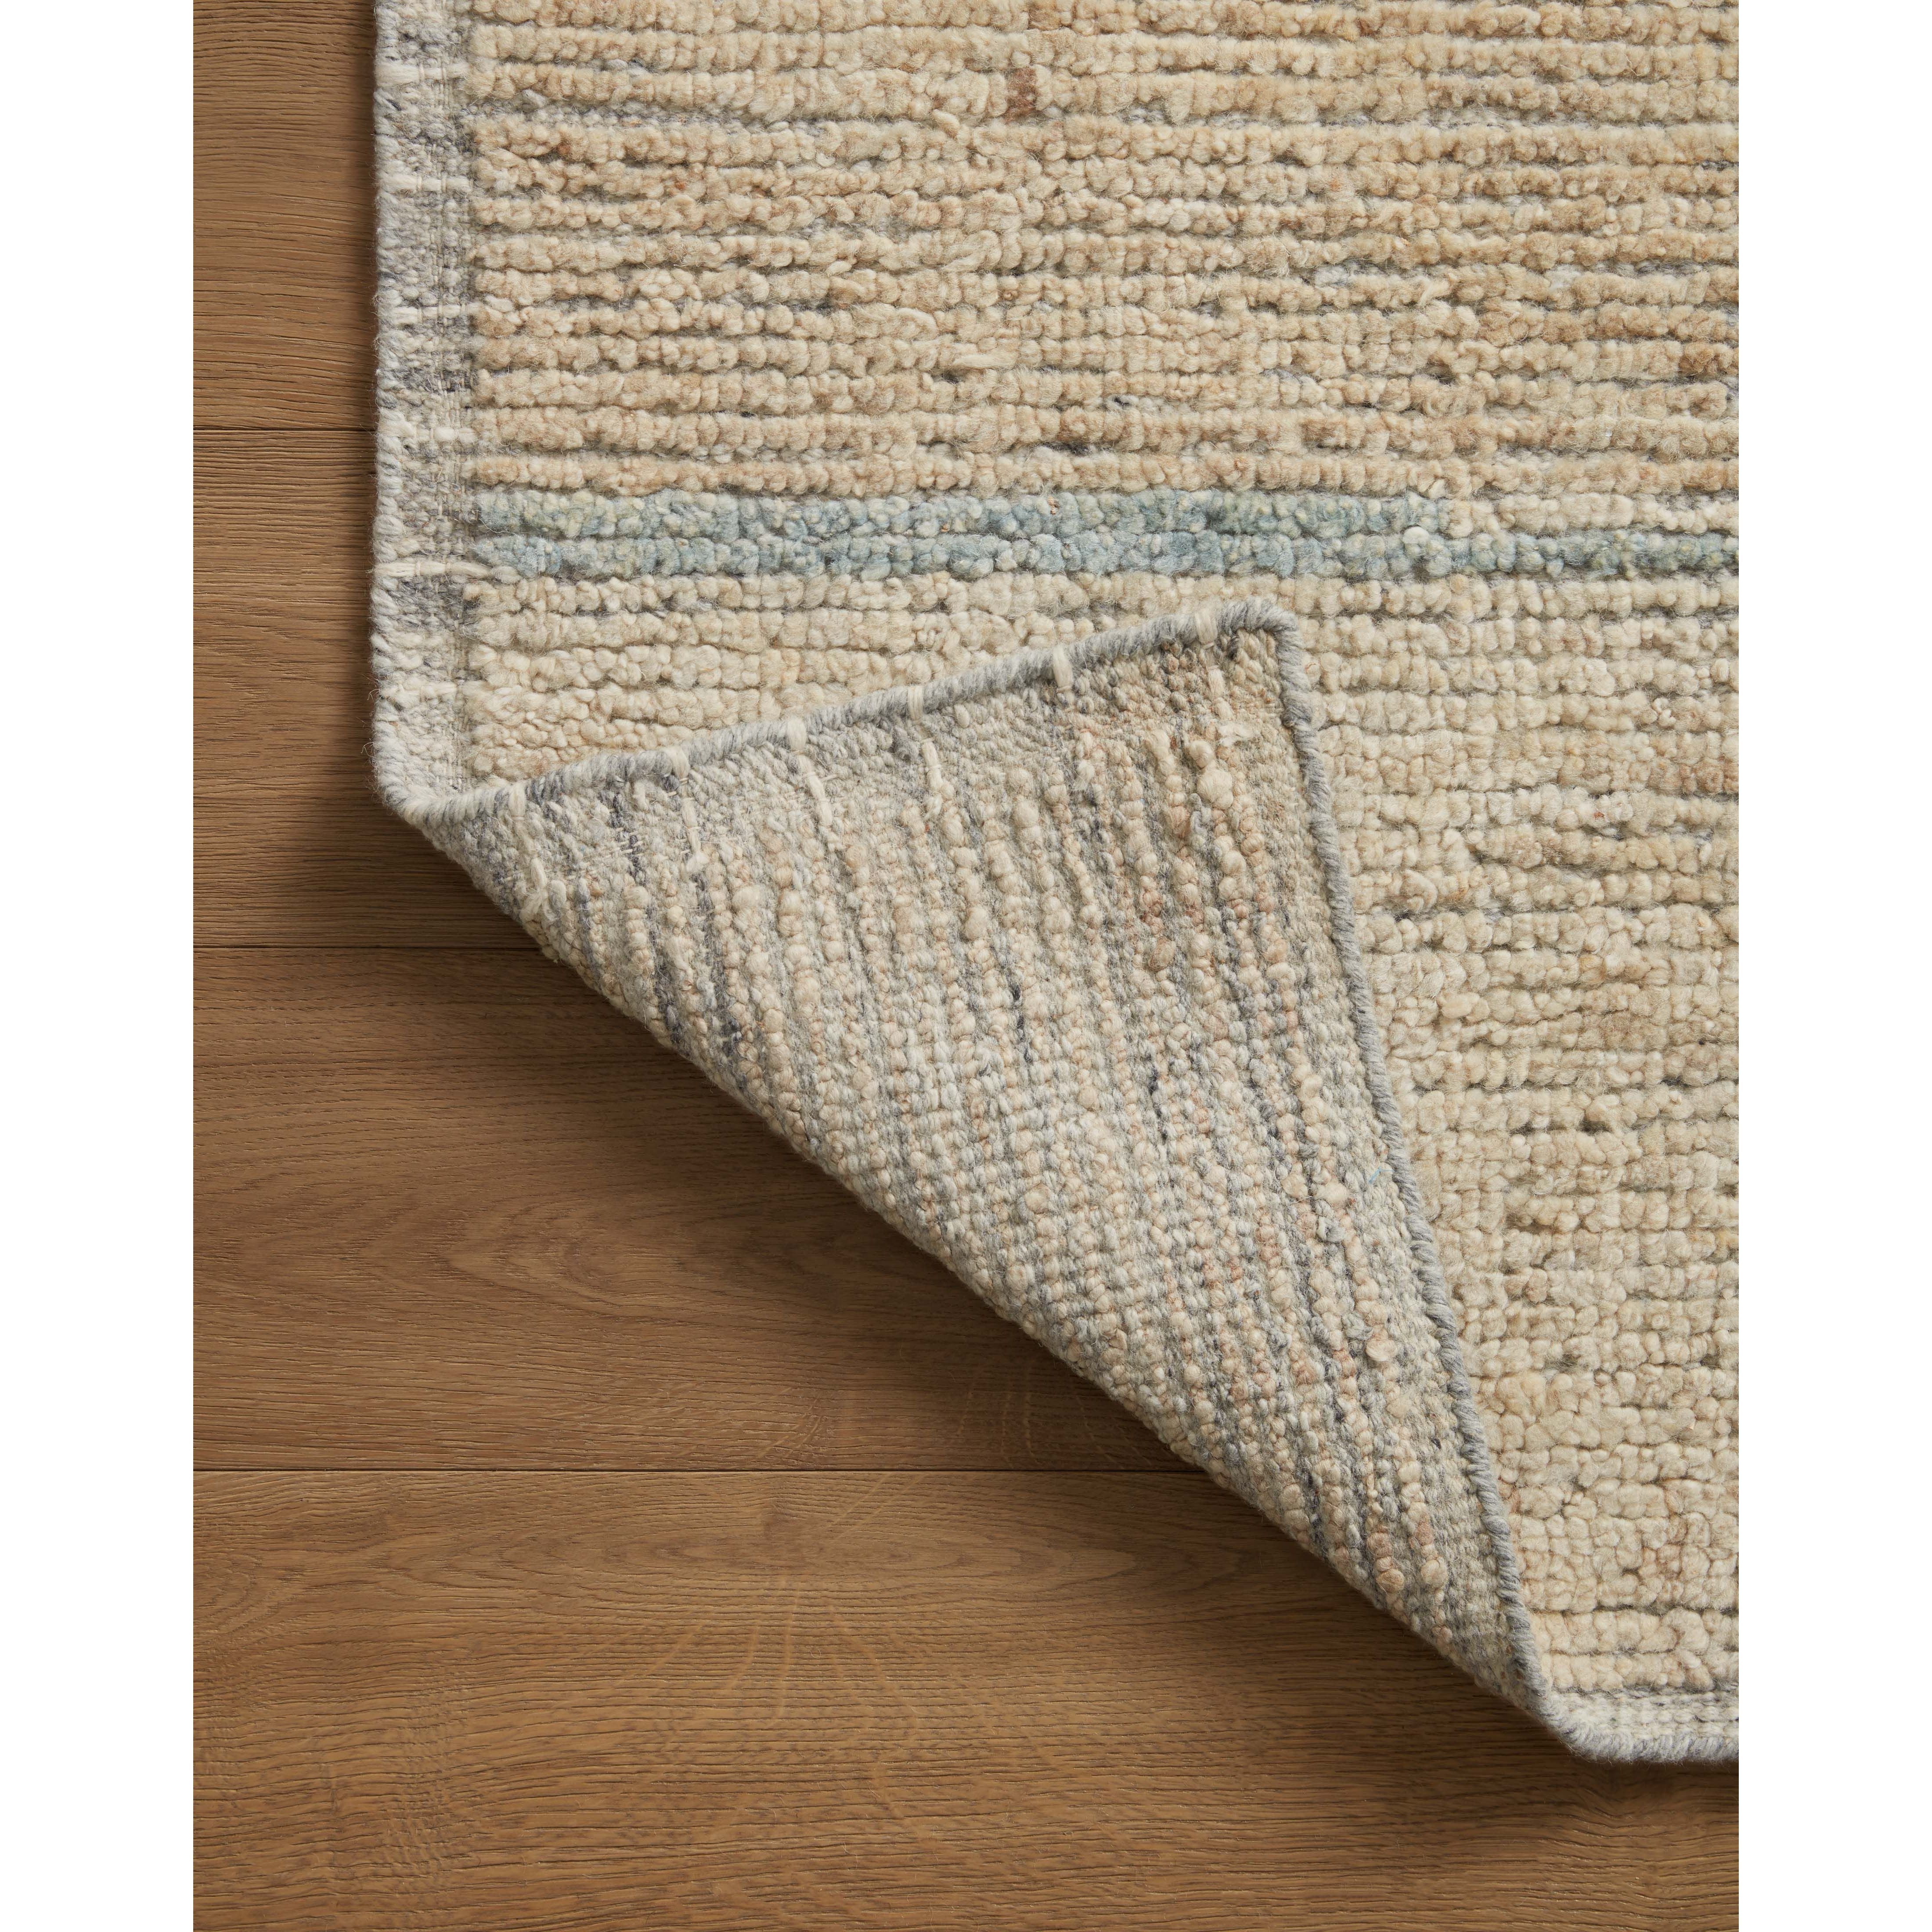 Amber Lewis x Loloi Briyana Sky / Wheat Rug combines the incredible ribbed texture of Moroccan rugs with clean, contemporary design, thanks to Lewis’s careful eye for details. Amethyst Home provides interior design services, furniture, rugs, and lighting in the Omaha metro area.